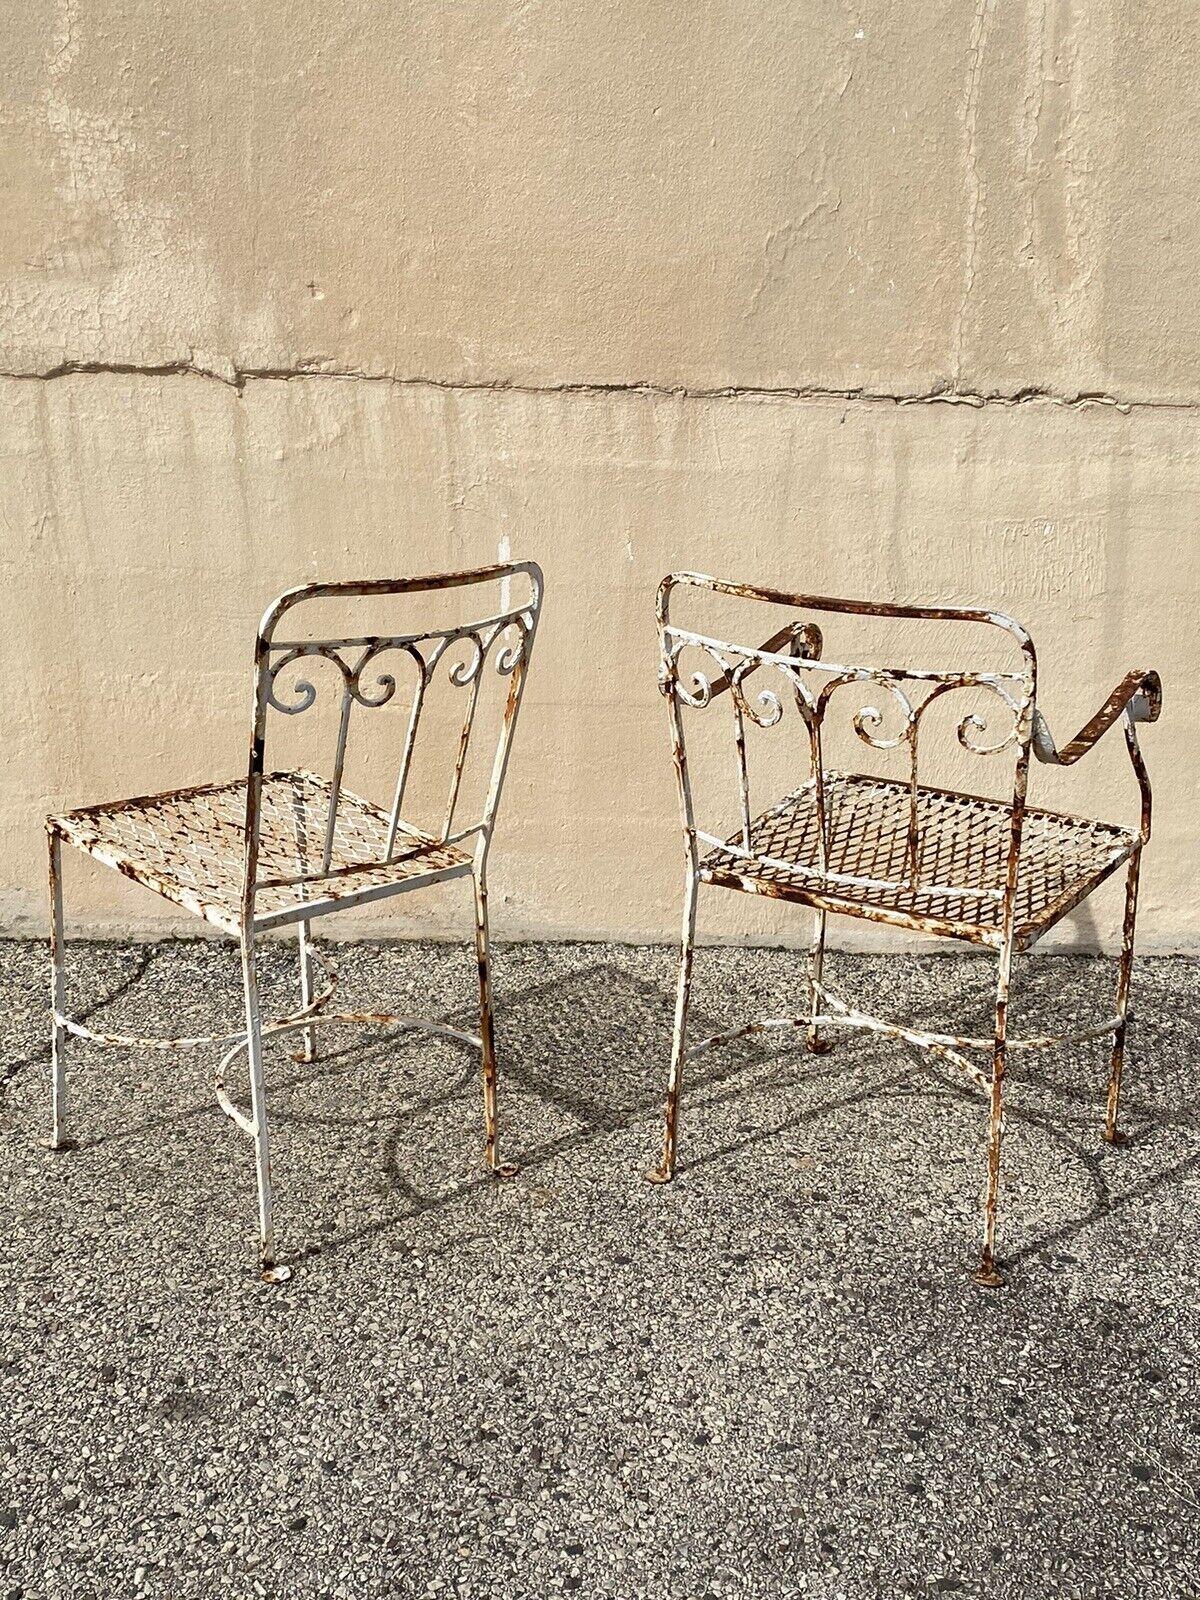 Antique Art Nouveau Scrolling Wrought Iron Garden Patio Dining Chairs - A Pair For Sale 6